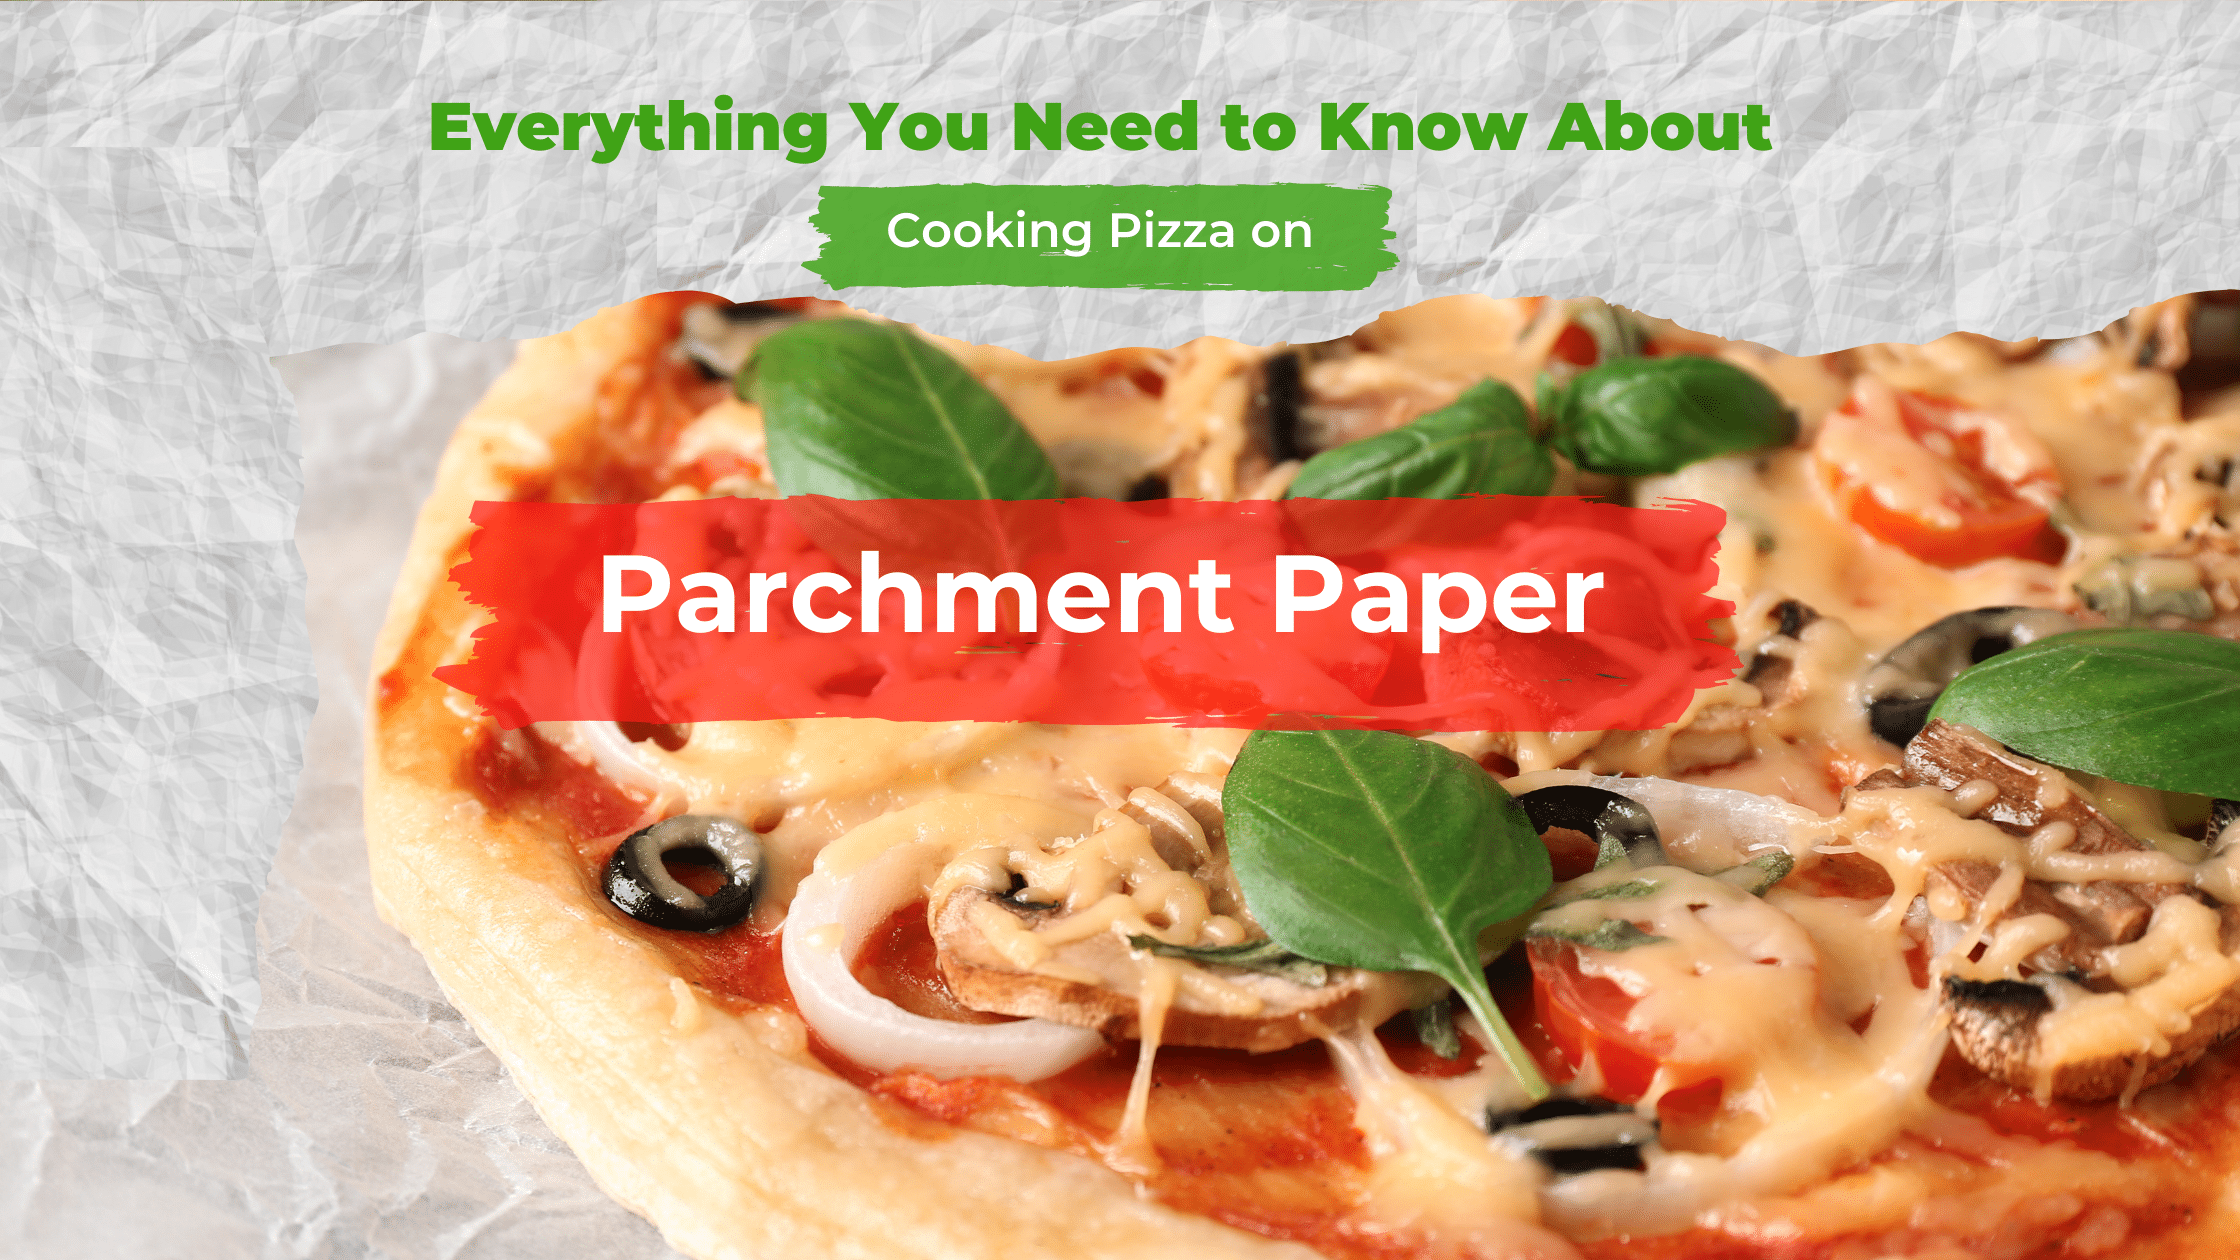 Pizza on Parchment Paper: Find Everything You Need to Know